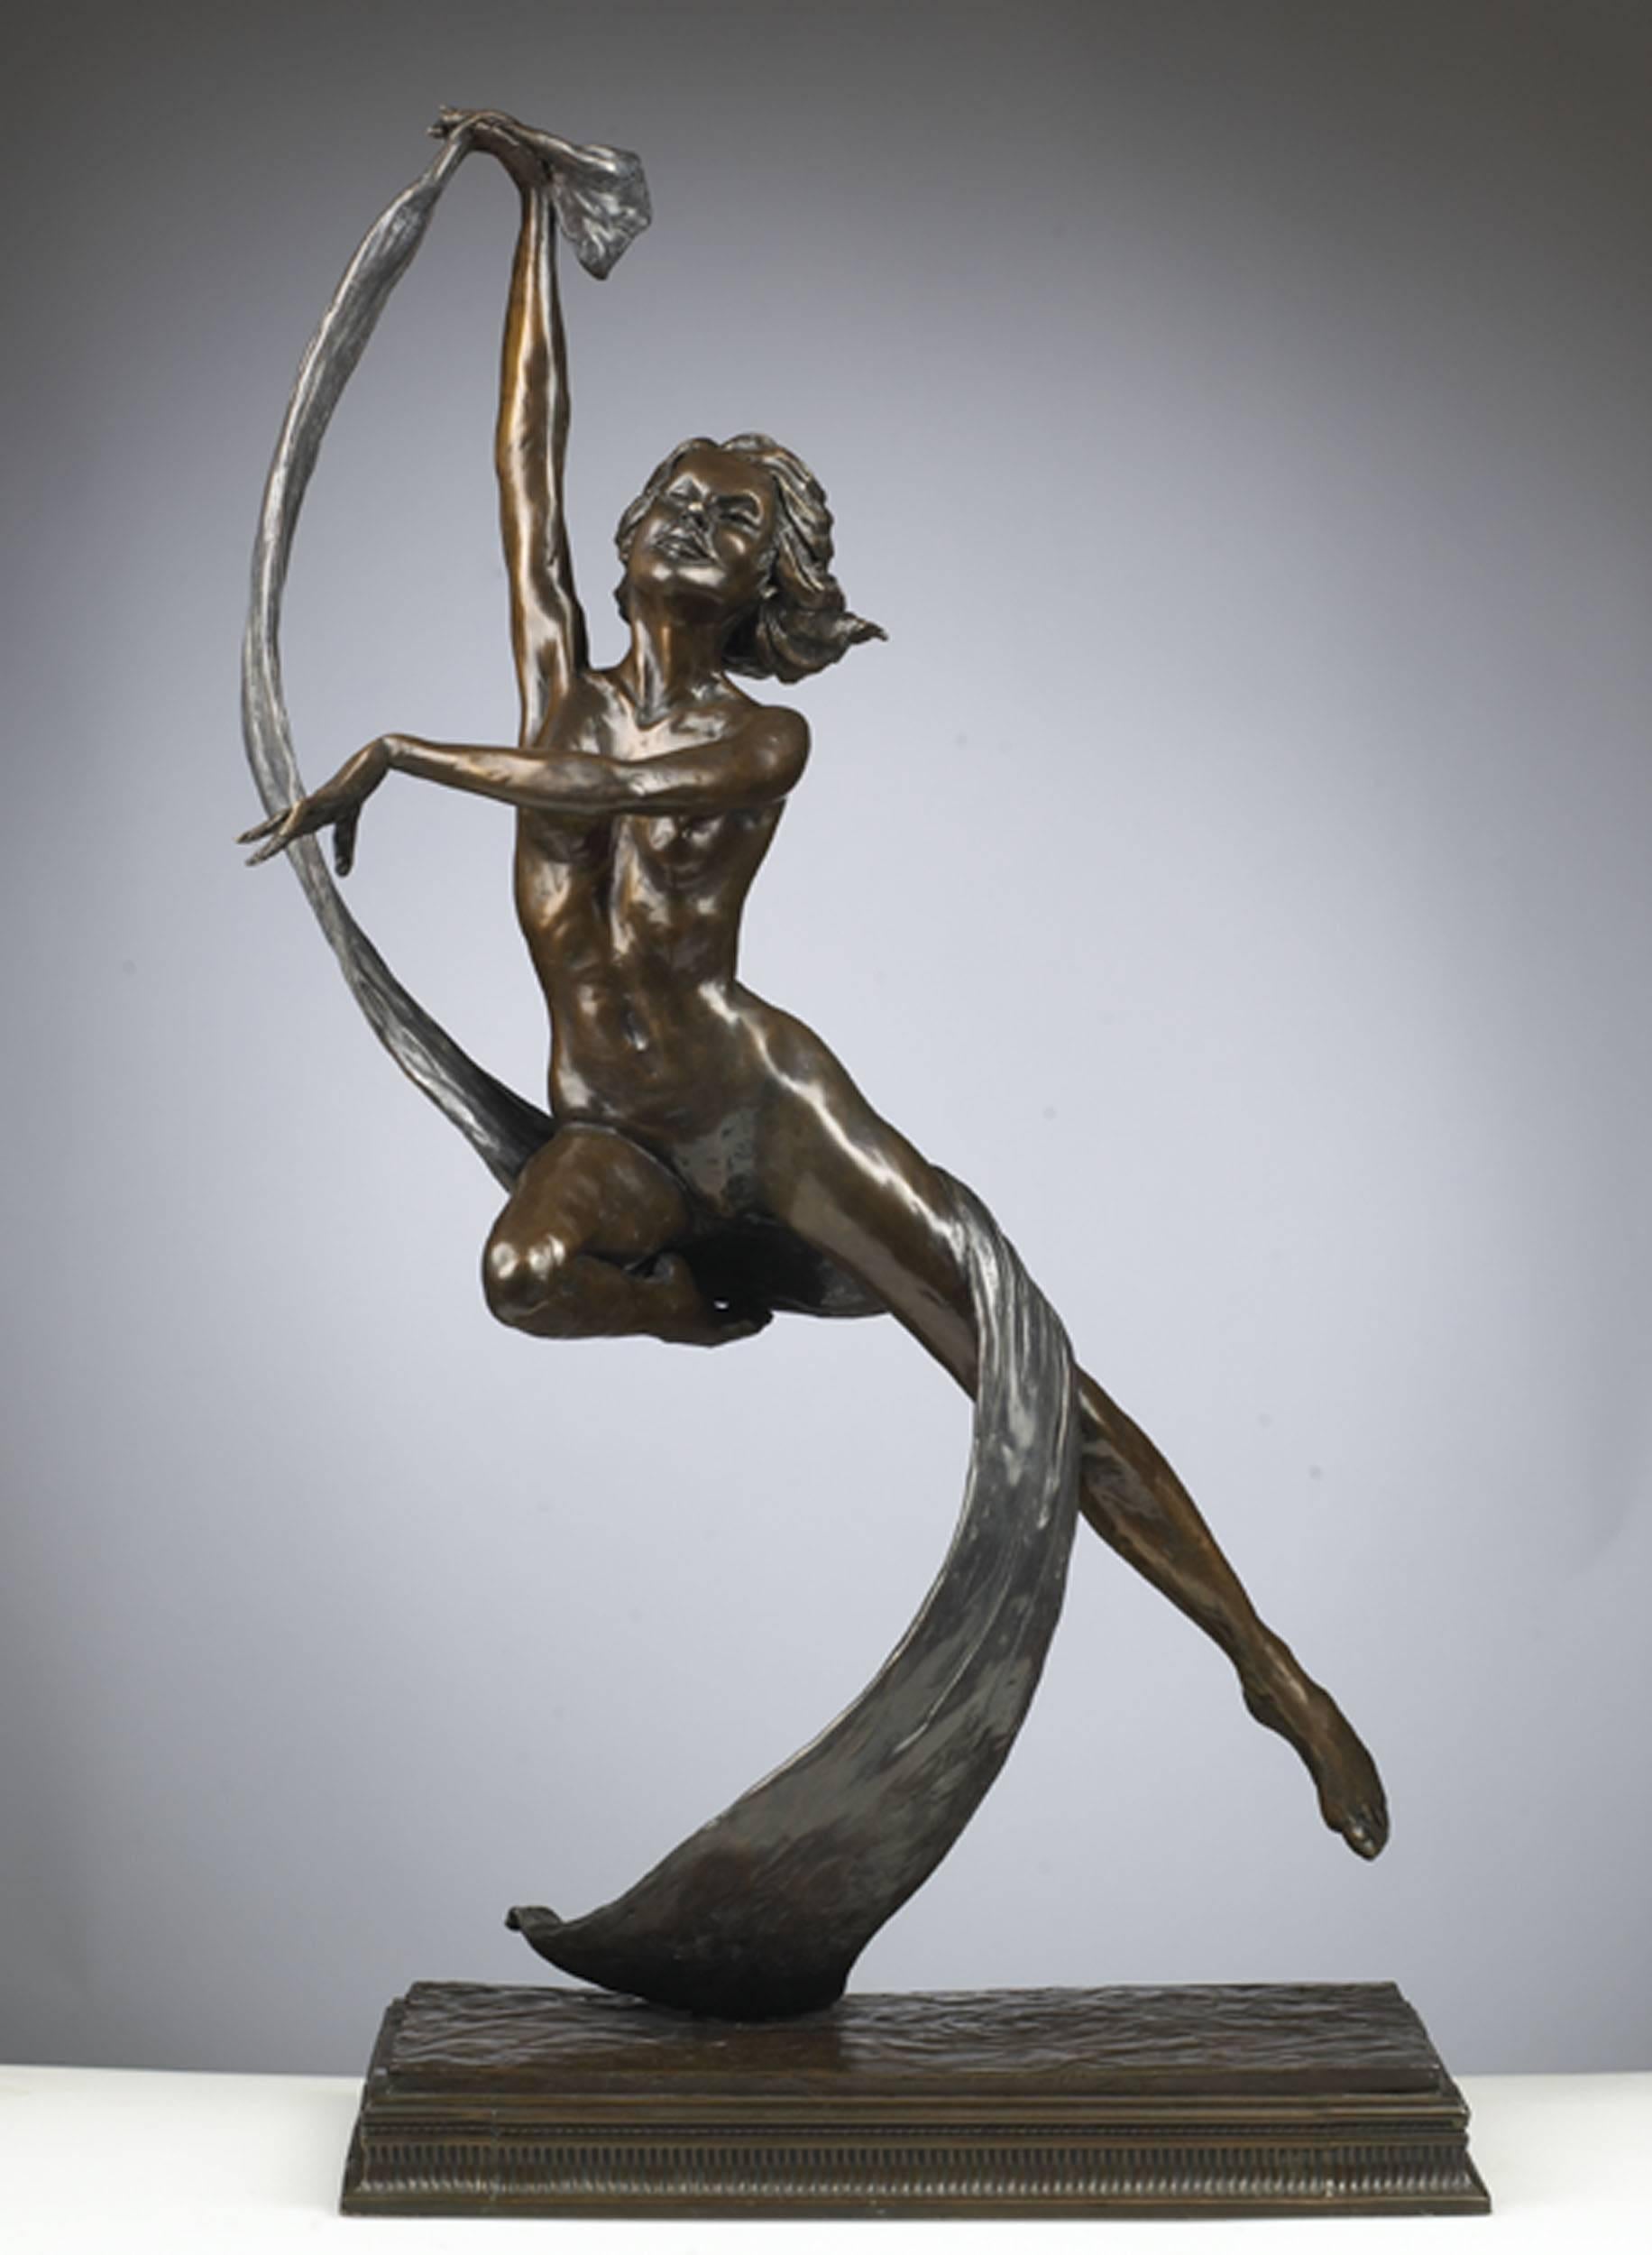 'Sprite' by Benson Landes  is a Contemporary Solid Bronze Nude Figurative Sculpture. The remarkable elegance conveyed is breath-taking and so representative of the ballet form. This beautiful piece is a welcome addition to any collection.

For